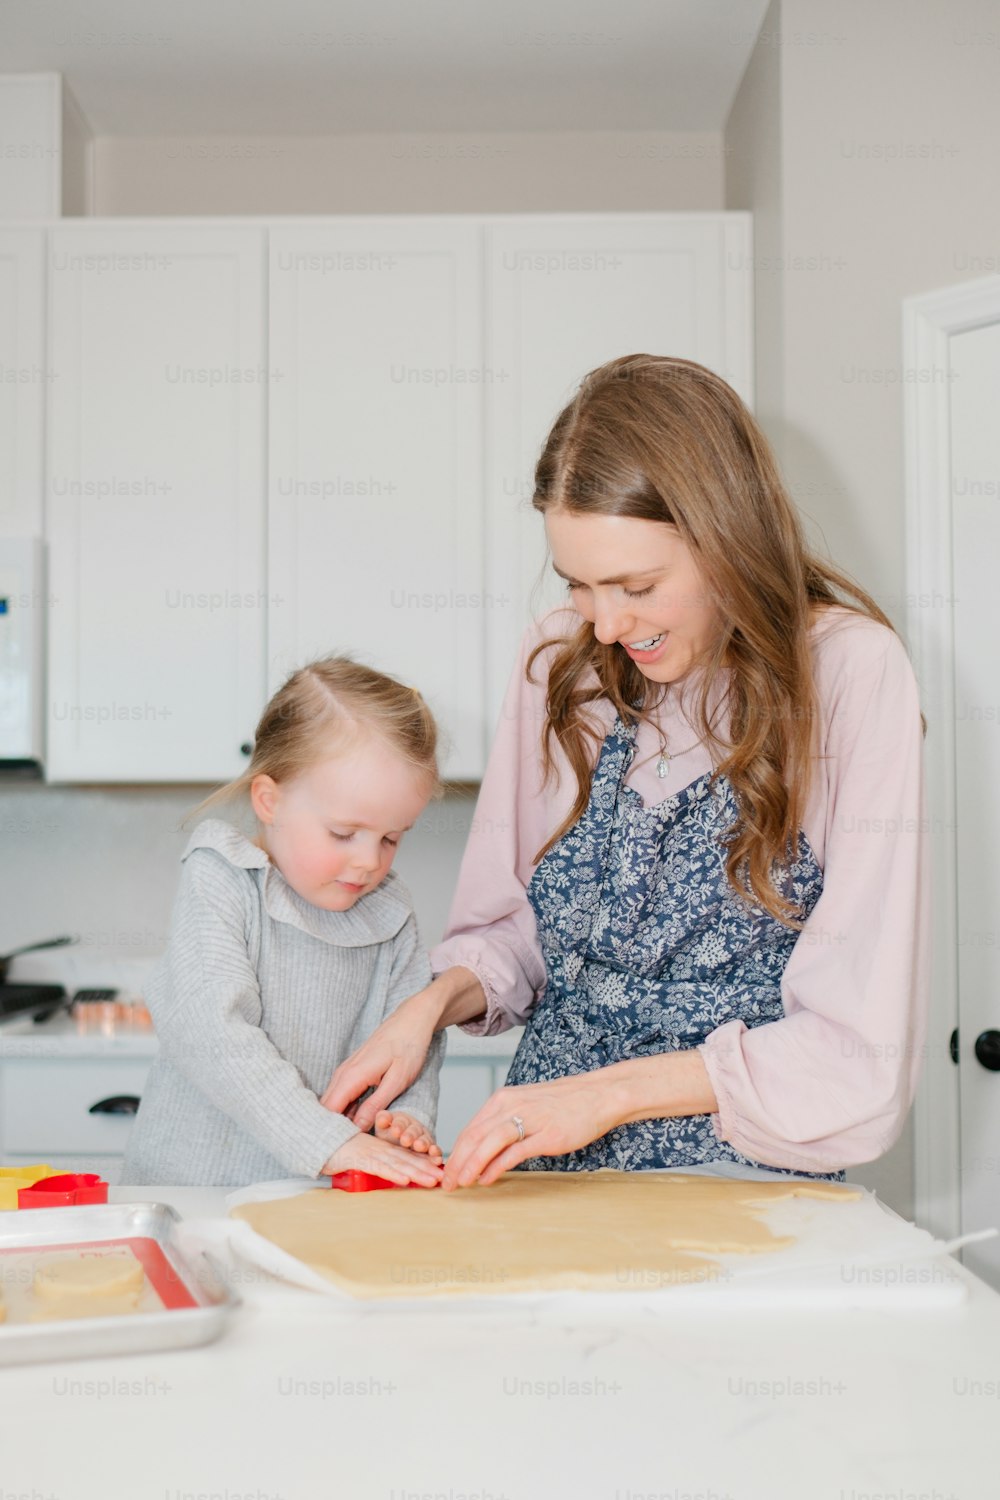 a woman and a child are in the kitchen